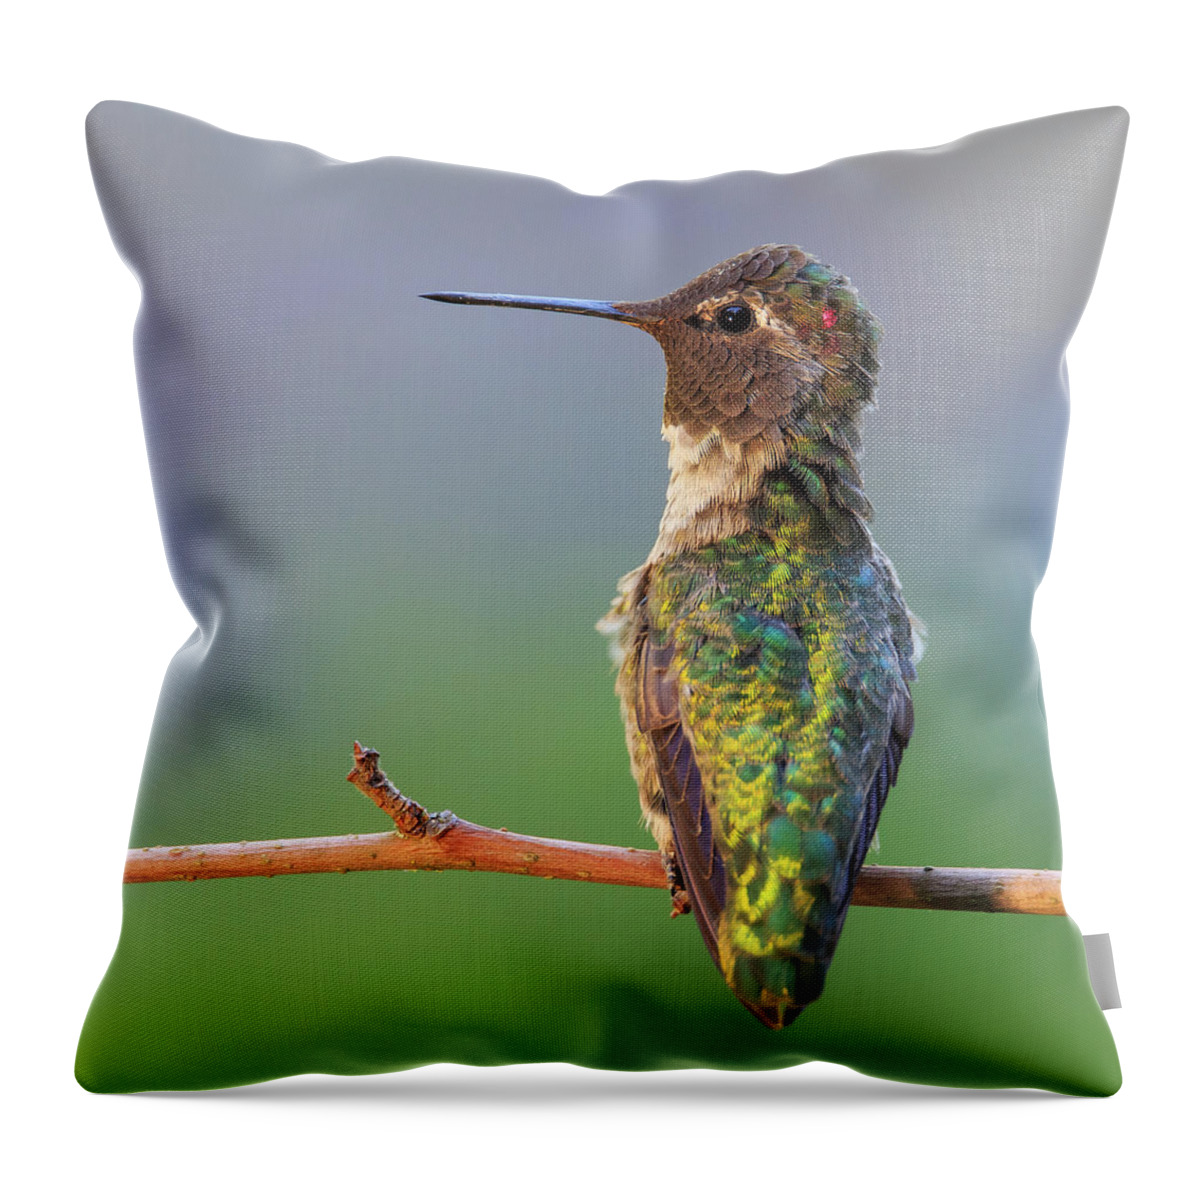 Animal Throw Pillow featuring the photograph Midsummer Night's Dream V - Male Anna's Hummingbird by Briand Sanderson